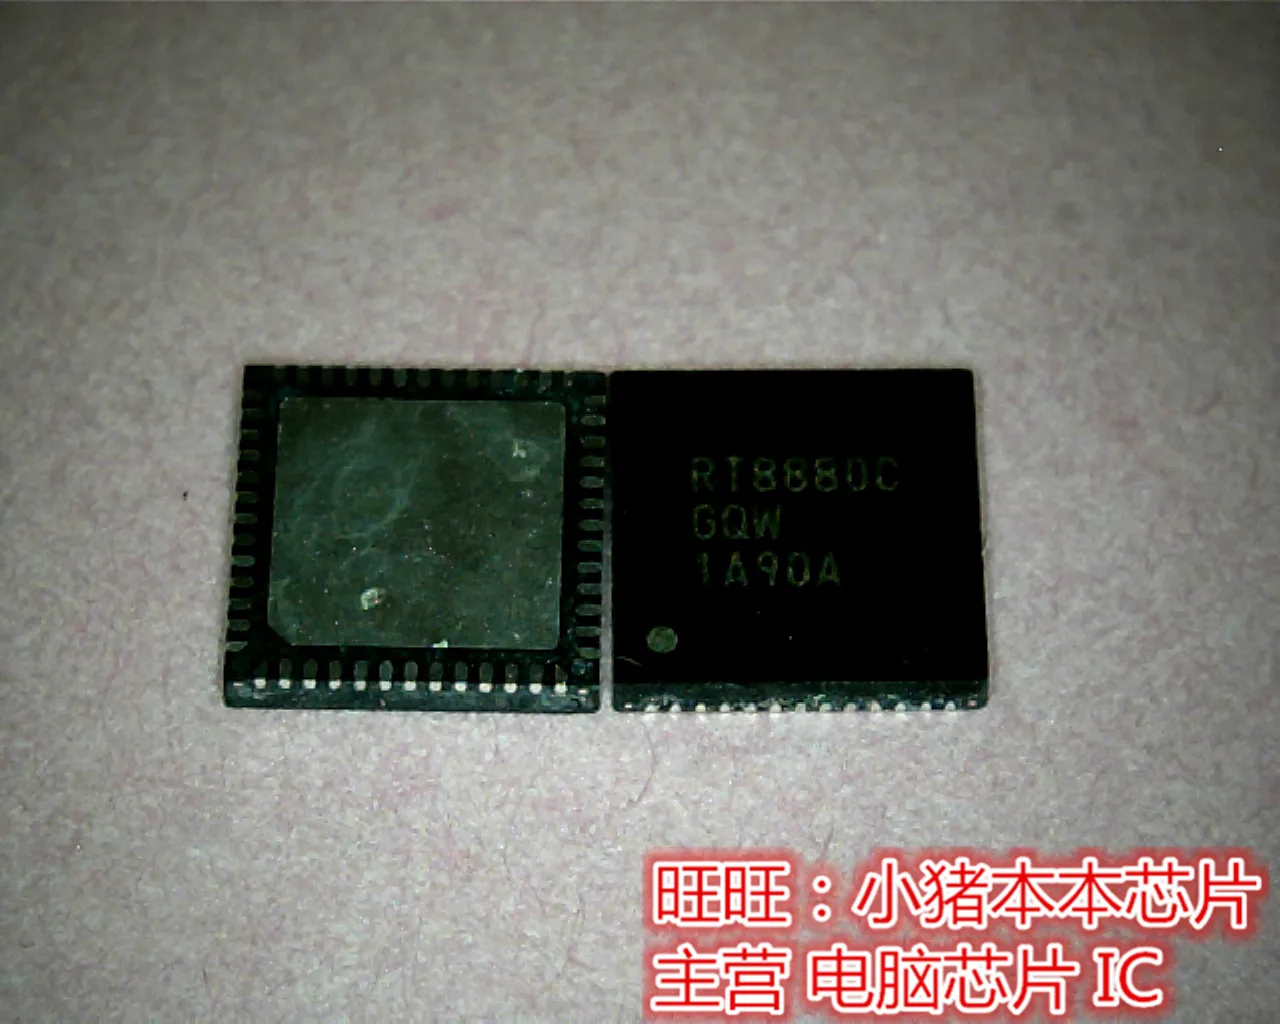 

2PCS/lot RT8880CGQW RT8880C QFN-52 Chipset 100% new imported original IC Chips fast delivery